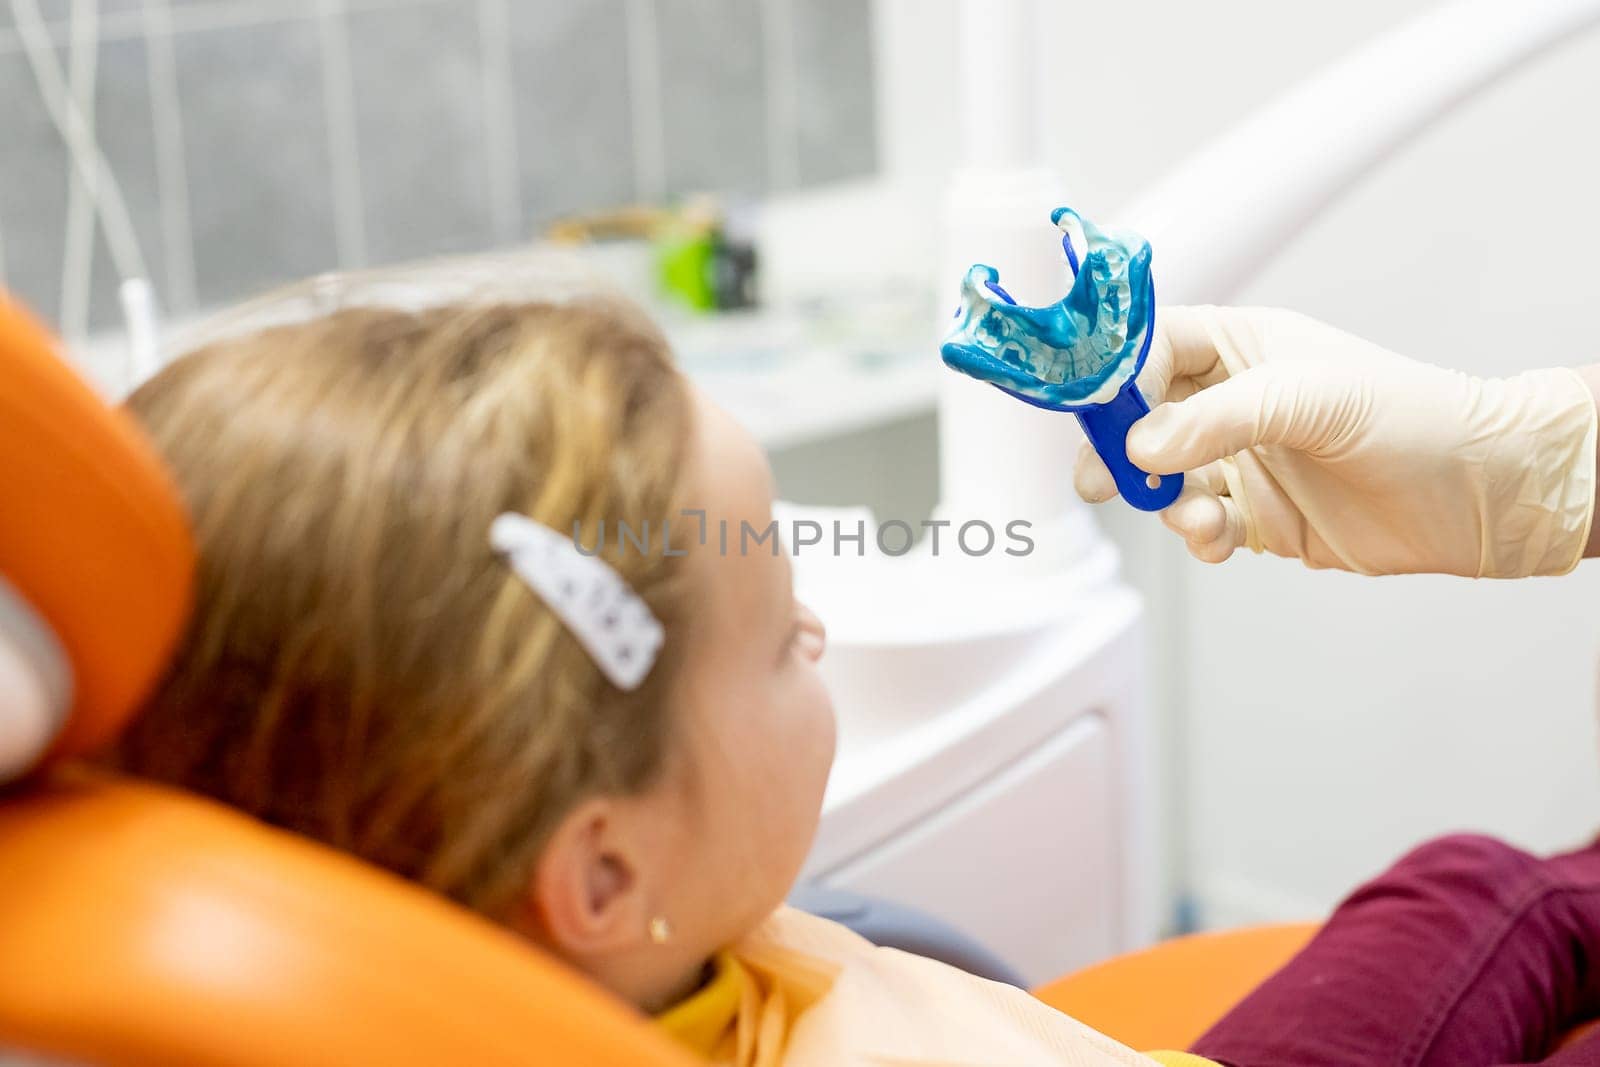 The orthodontist prepares a special paste for making an impression of the patient's teeth.Child during orthodontist visit and oral cavity check-up by YuliaYaspe1979